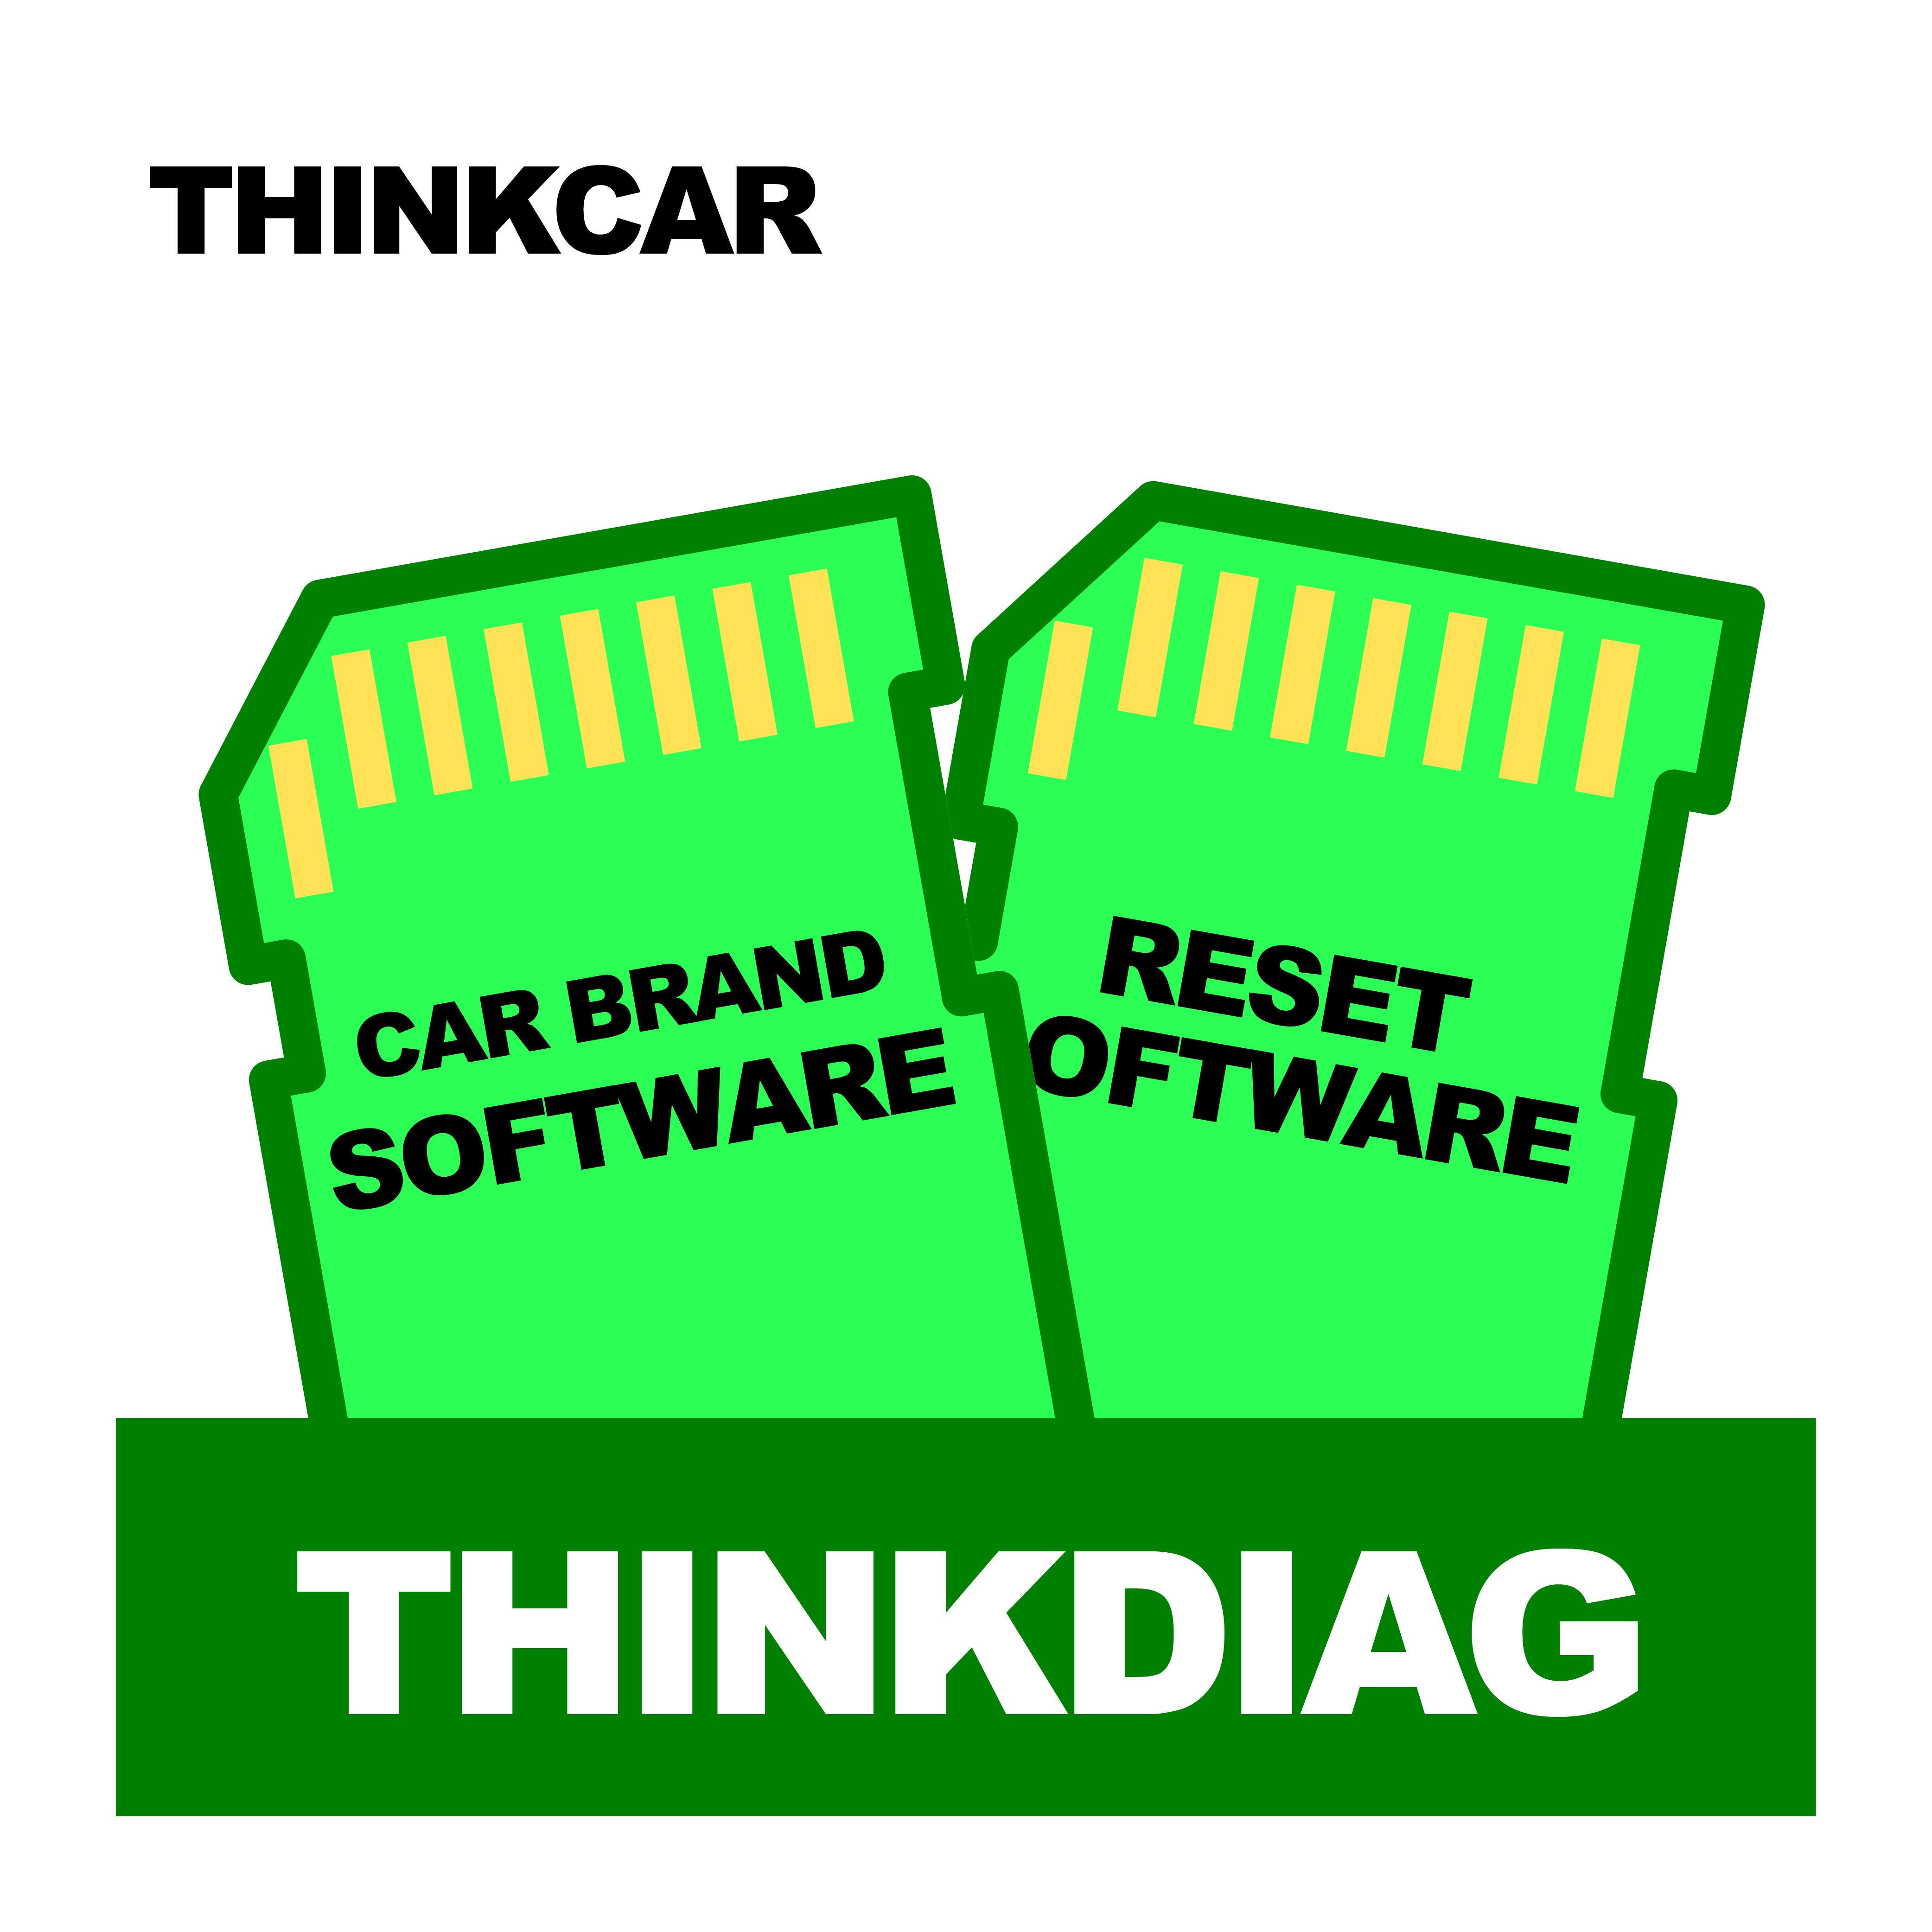 THINKCAR Thinkdiag All Software for 2 Years PK Easydiag 24 Hours Unlock Car 15 Reset Software Activate Full Software for Thinkdiag